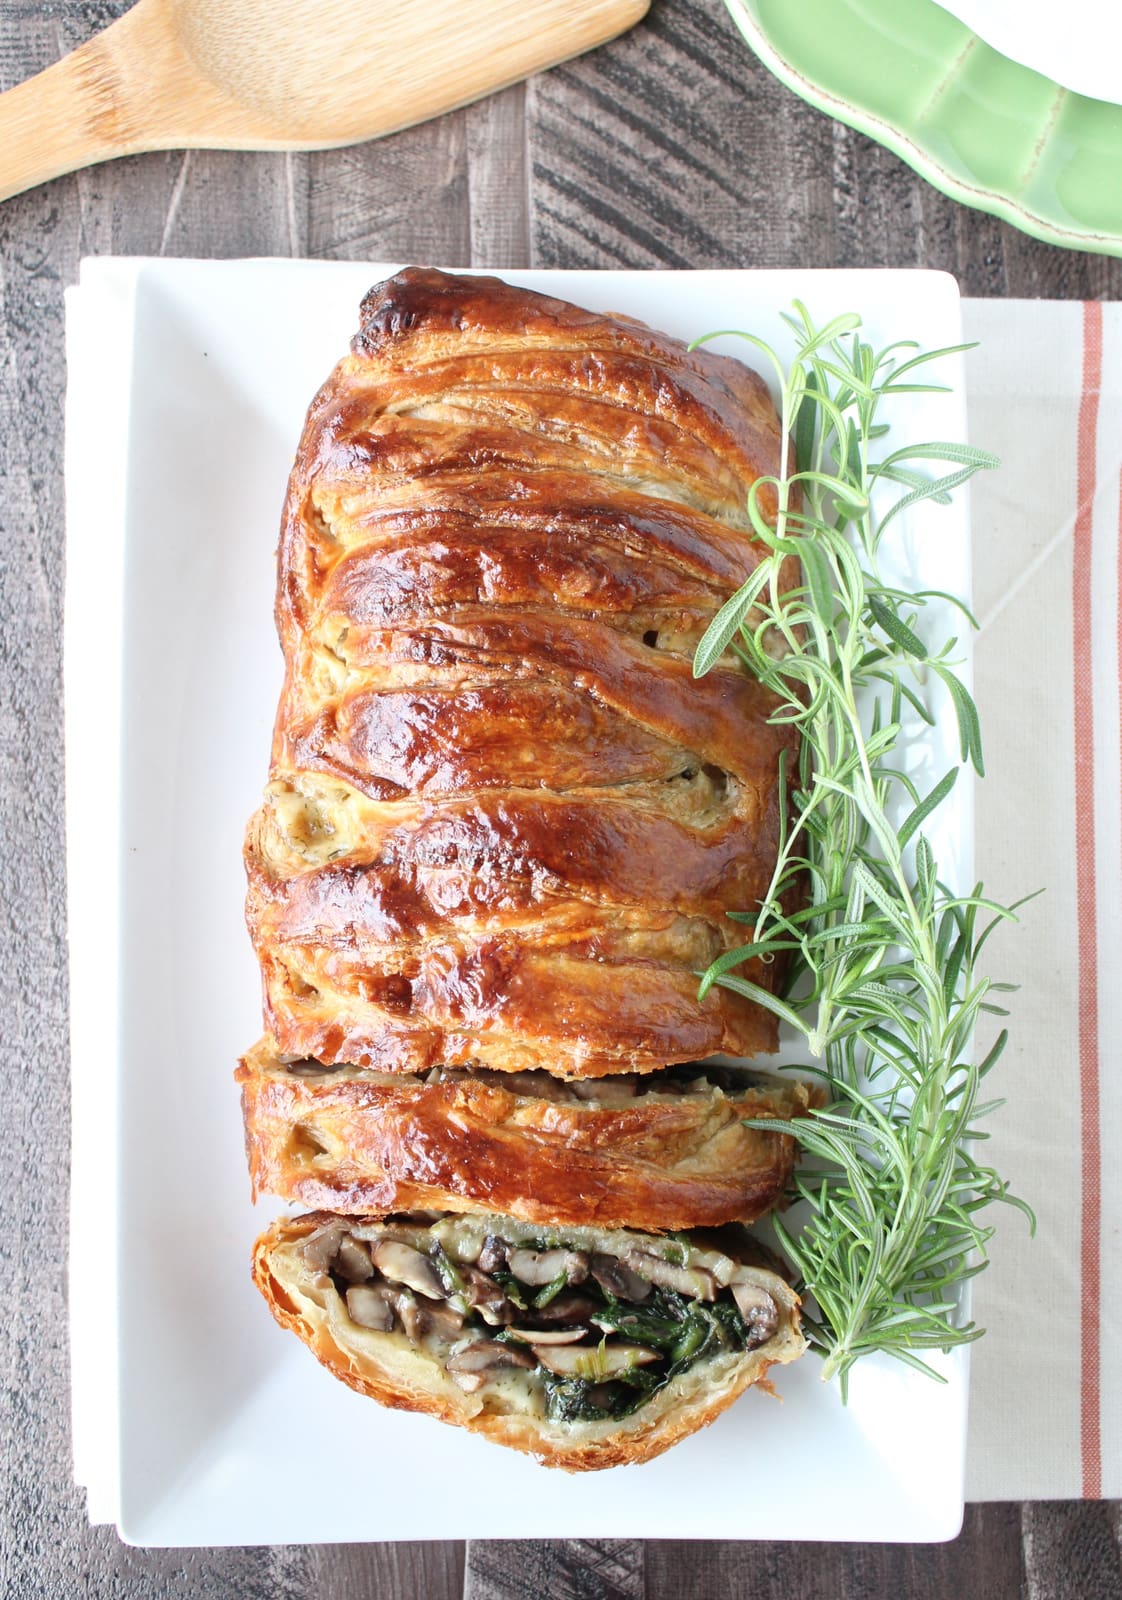 baked puff pastry filled with mushrooms and spinach